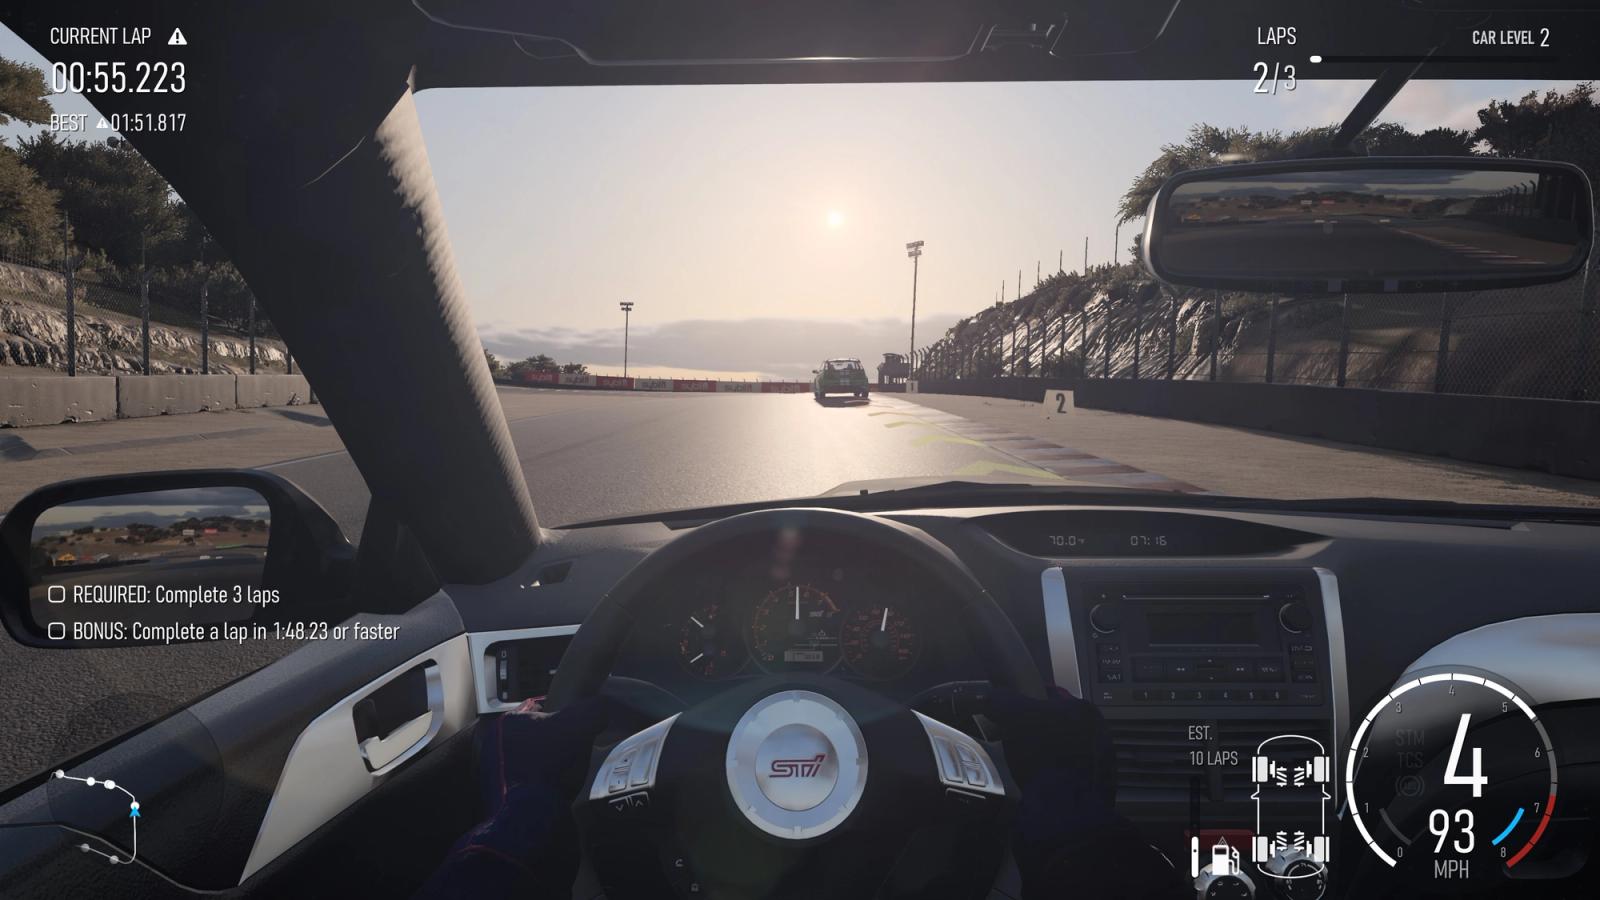 Does Forza Motorsport support VR